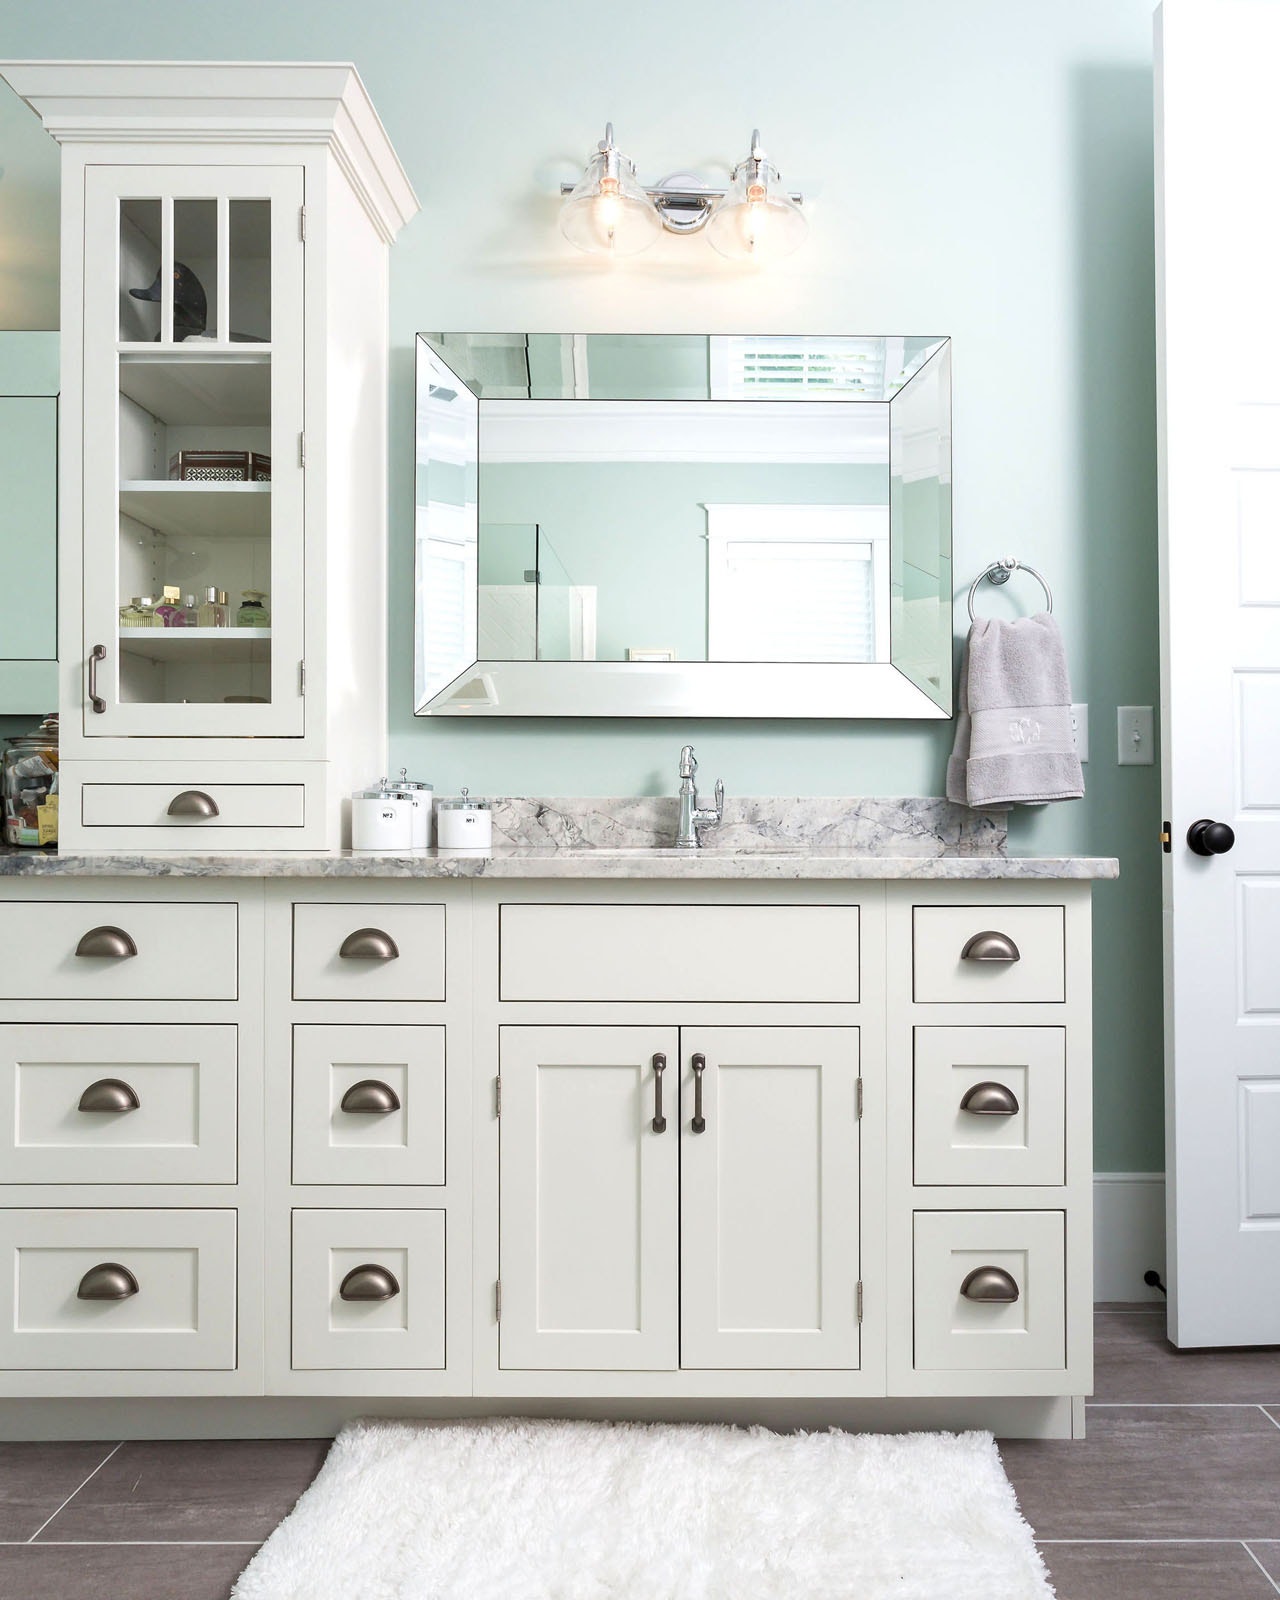 CliqStudios bath cabinets shown in Austin White door style and finish